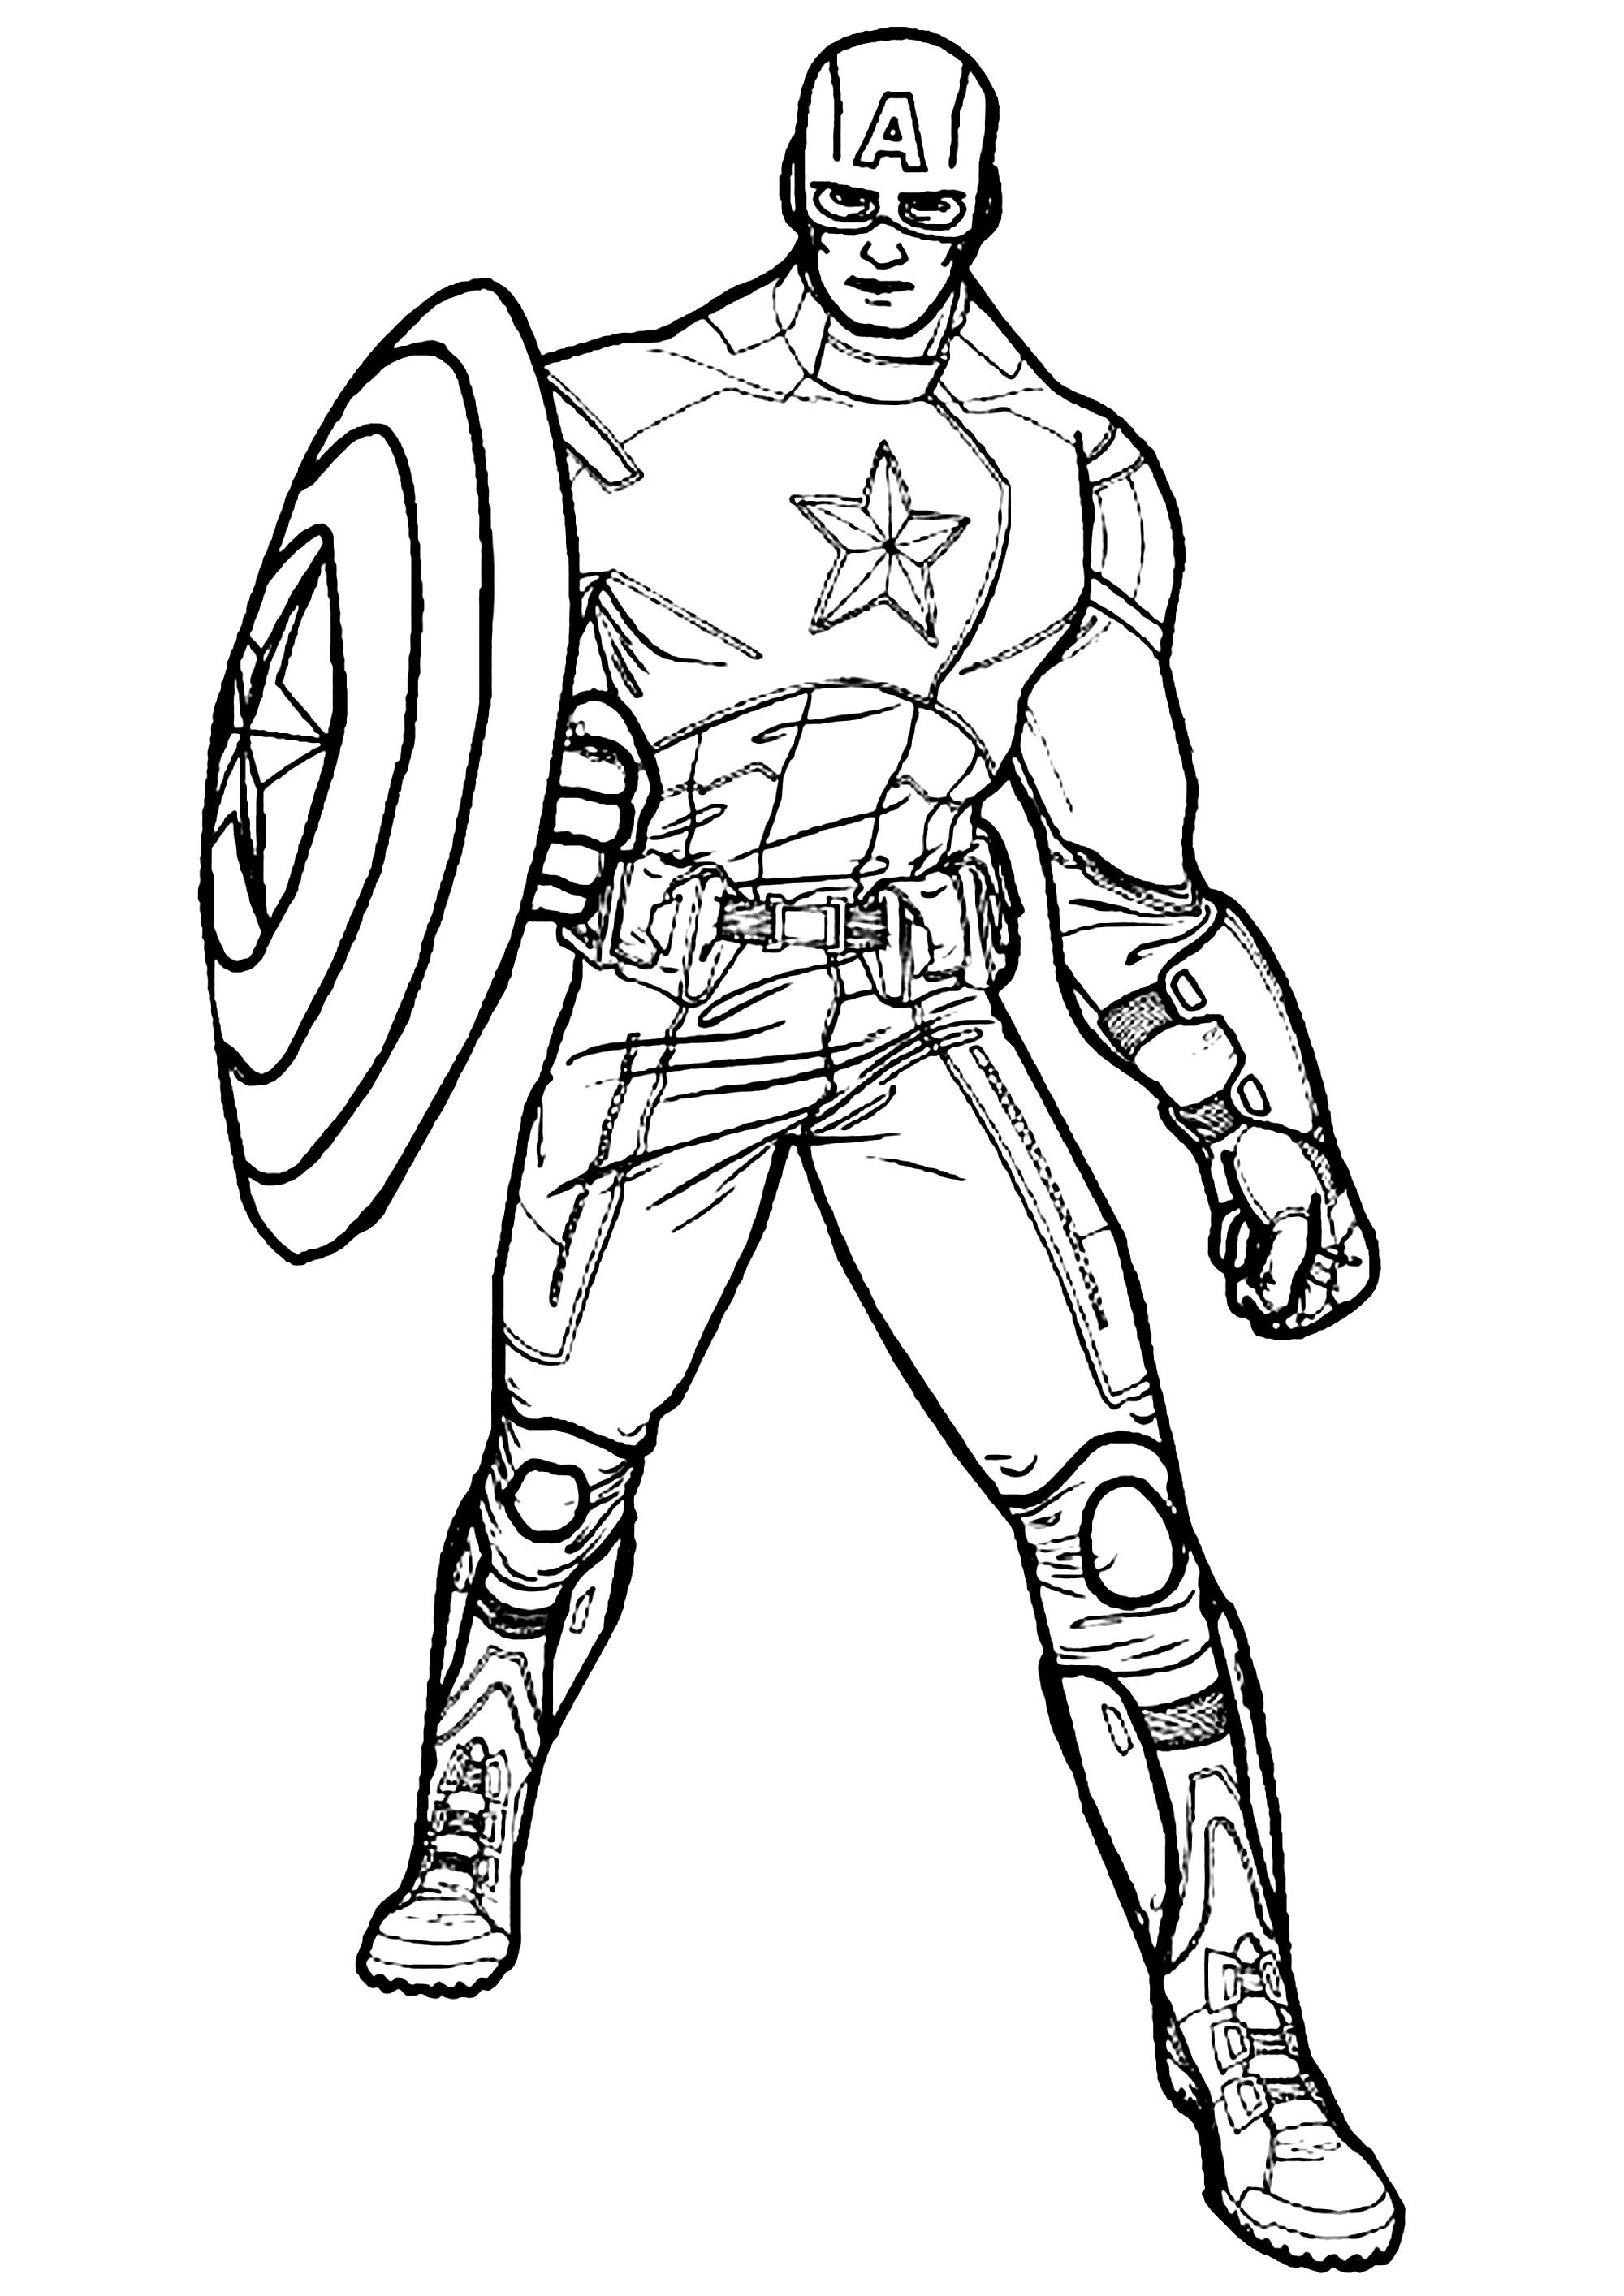 Captain America - Captain America Kids Coloring Pages